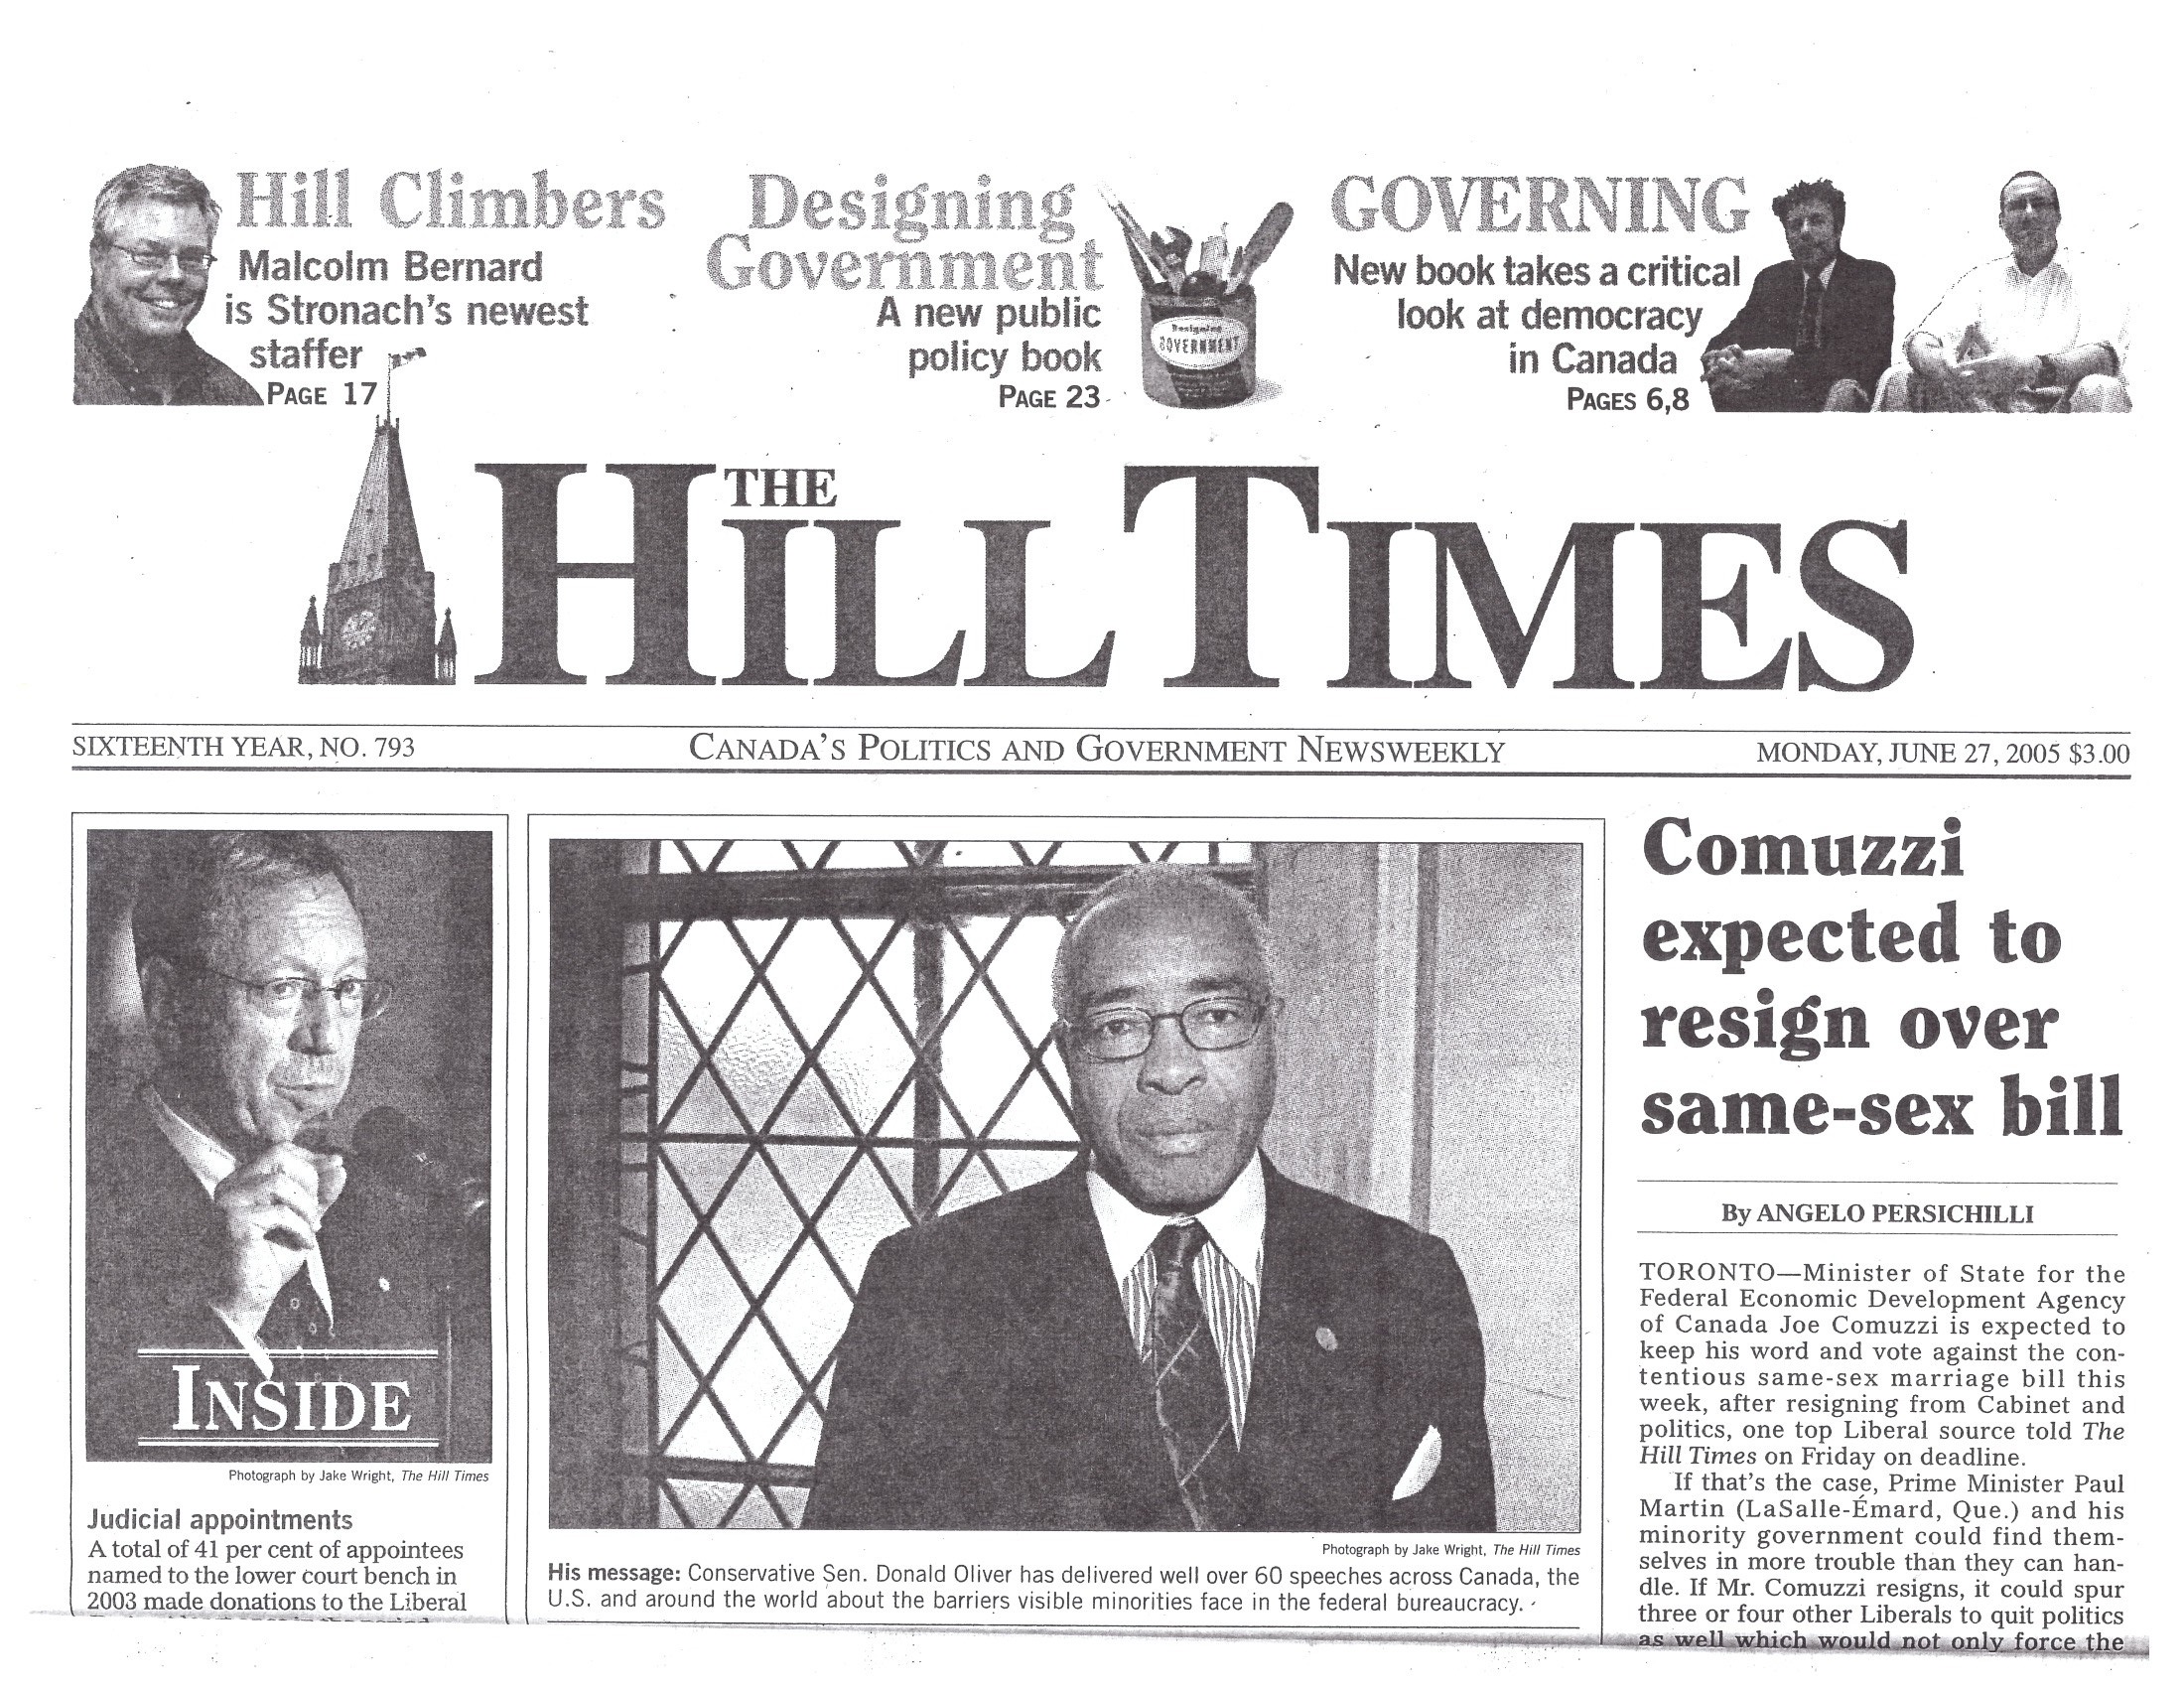 Senator Donald Oliver Delivered Over 60 Speeches -The Hill Times June 27, 2005 front page